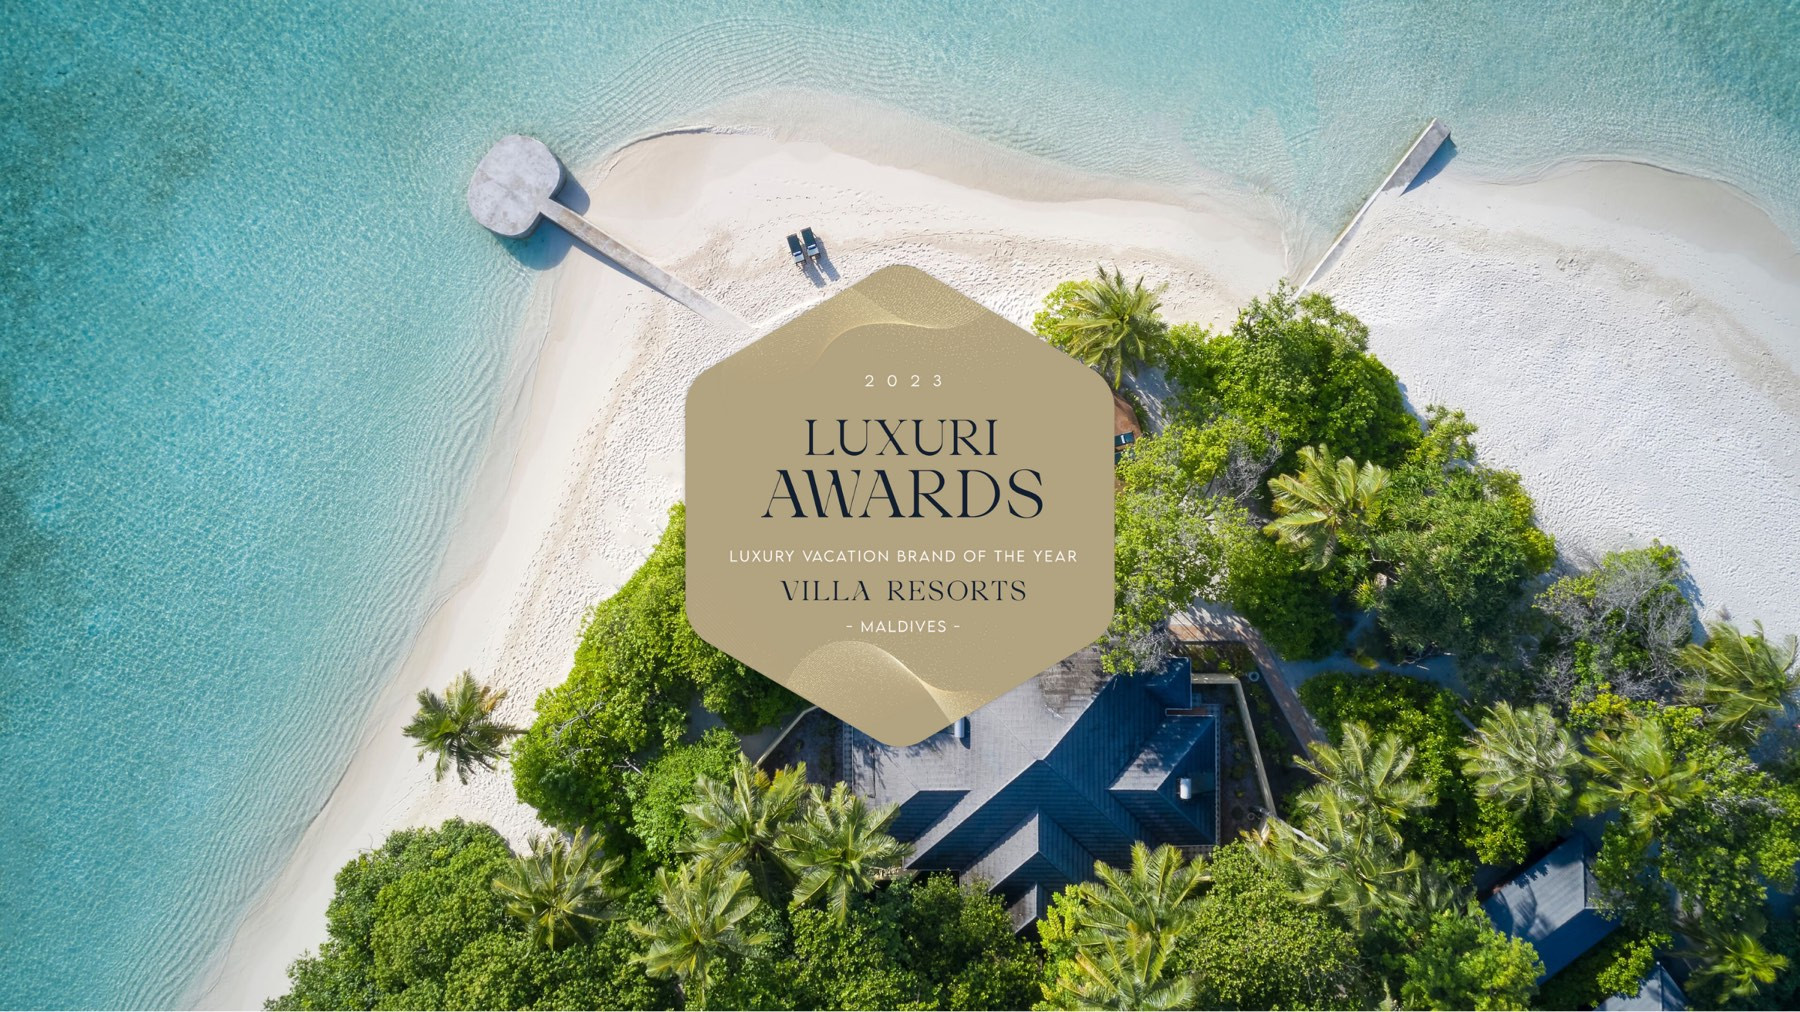 Villa Resorts Clinches 'Luxury Vacation Brand of the Year' Title at Luxuri Awards 2023